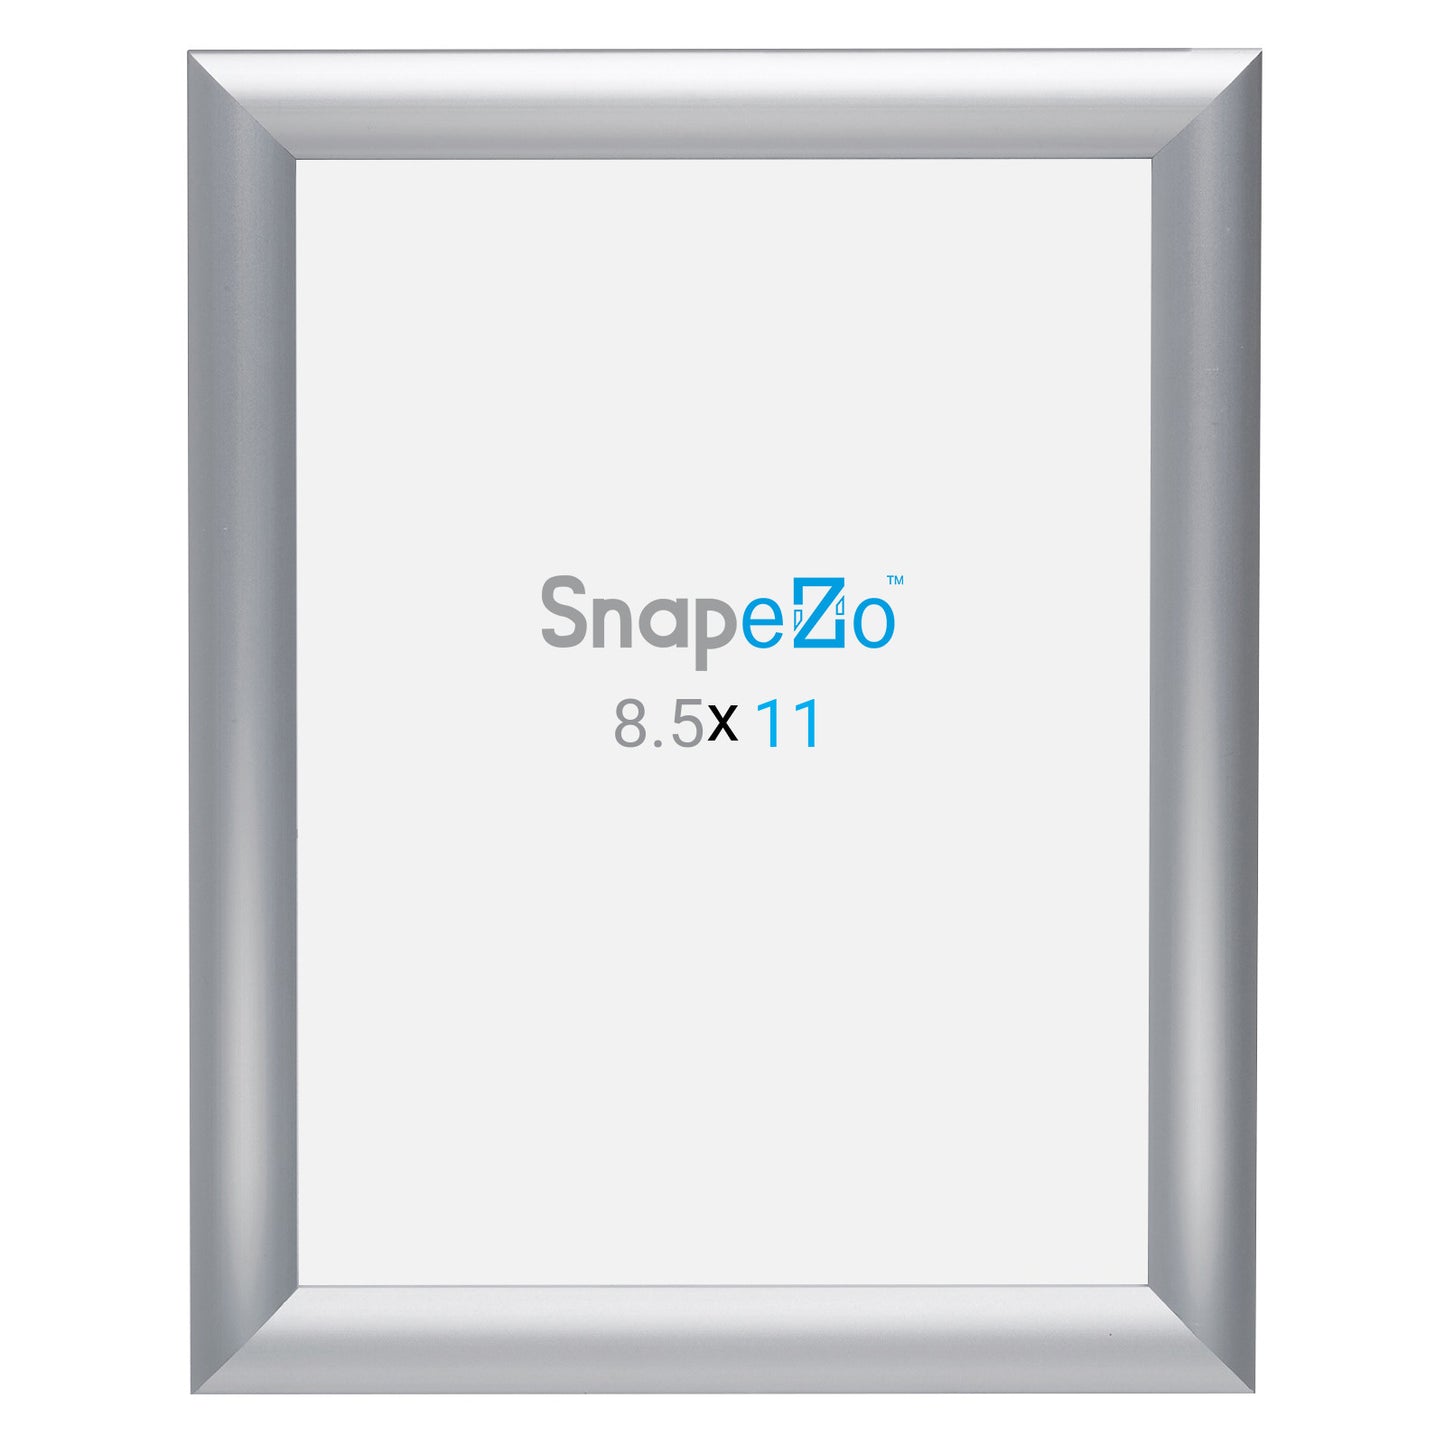 Twin-Pack of Snapezo® Silver 8.5x11 Certificate Frame - 1" Profile